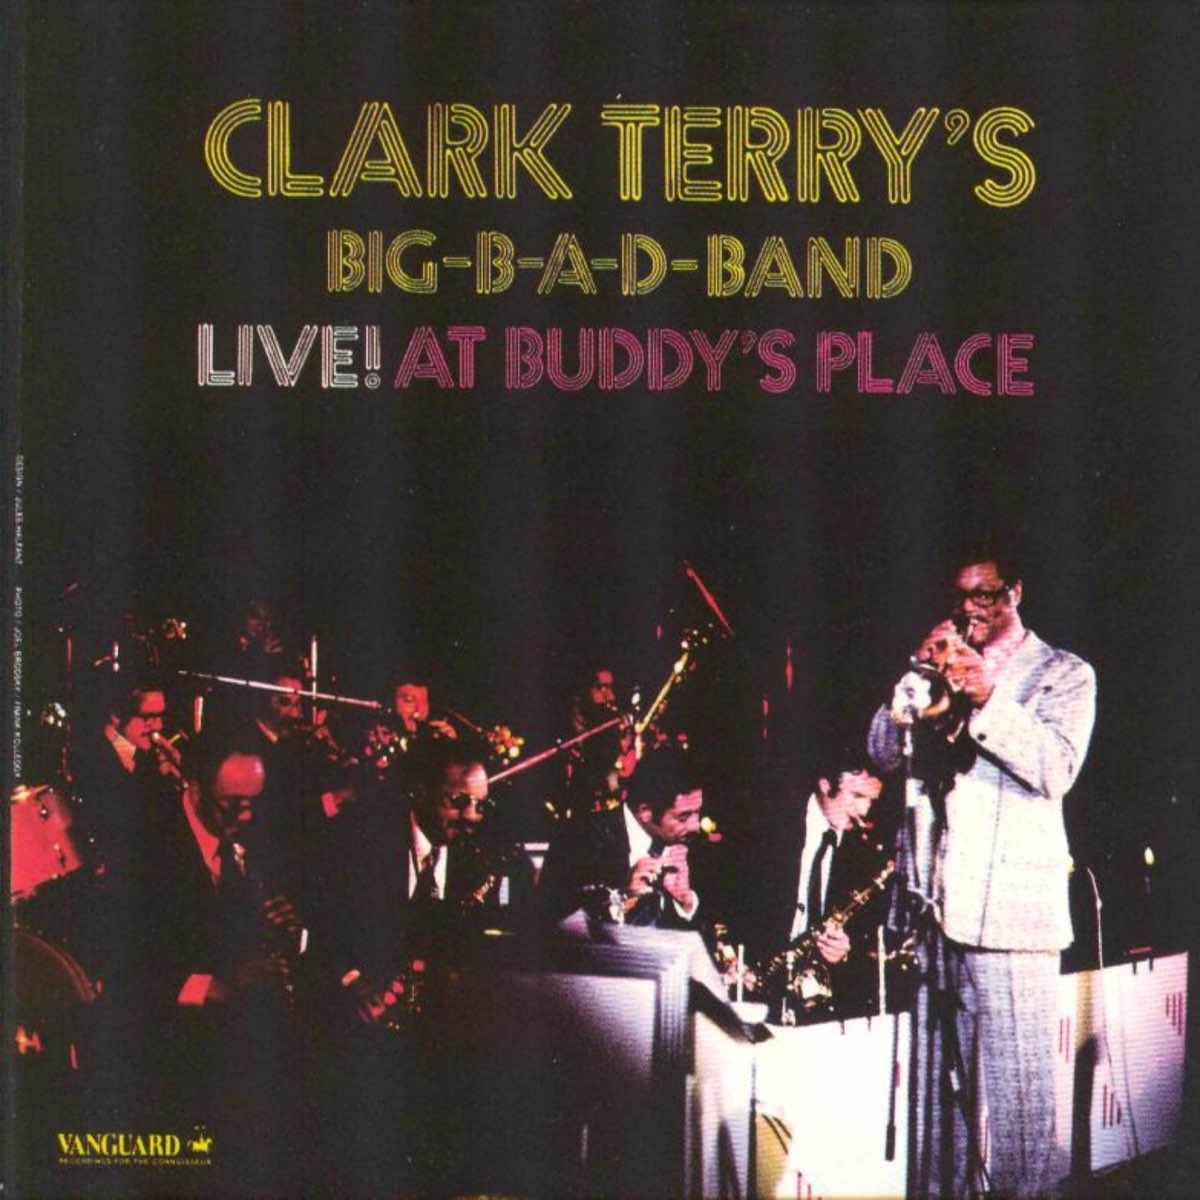 ‎Live At Buddy's Place by Clark Terry's Big B-A-D Band on Apple Music